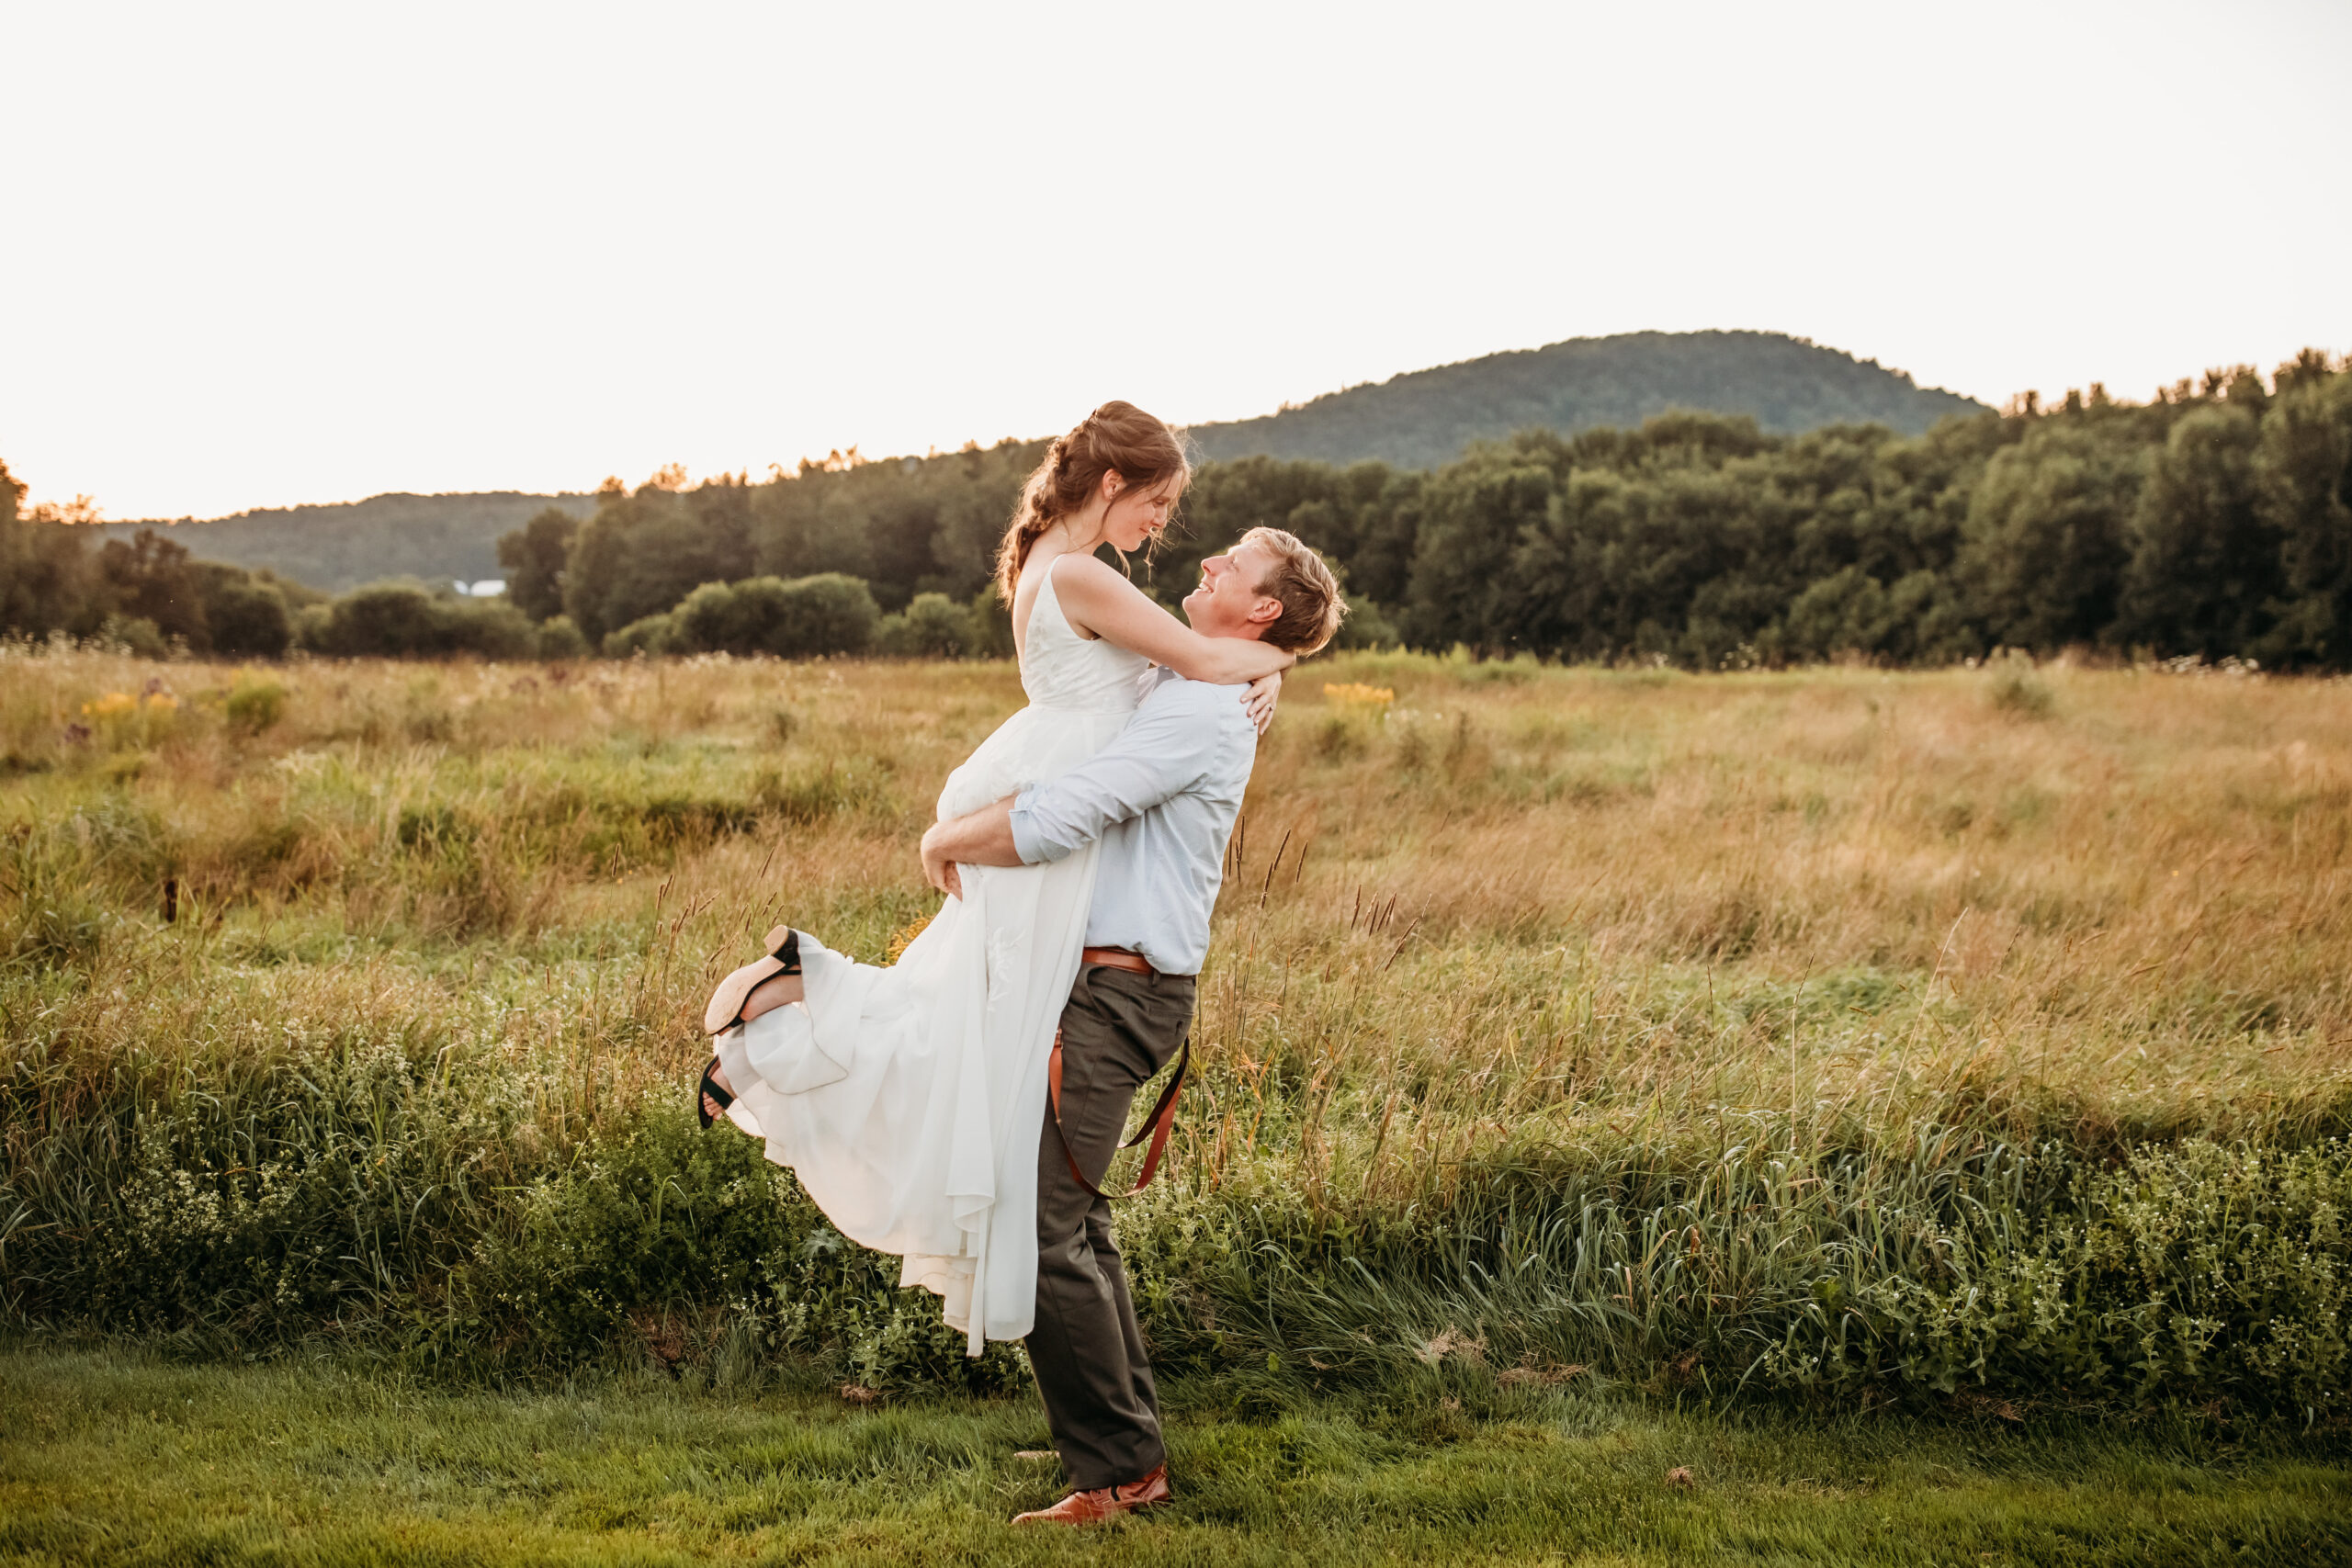 Greg holding Jess in his arms outside in a field at their Vermont farm wedding venue